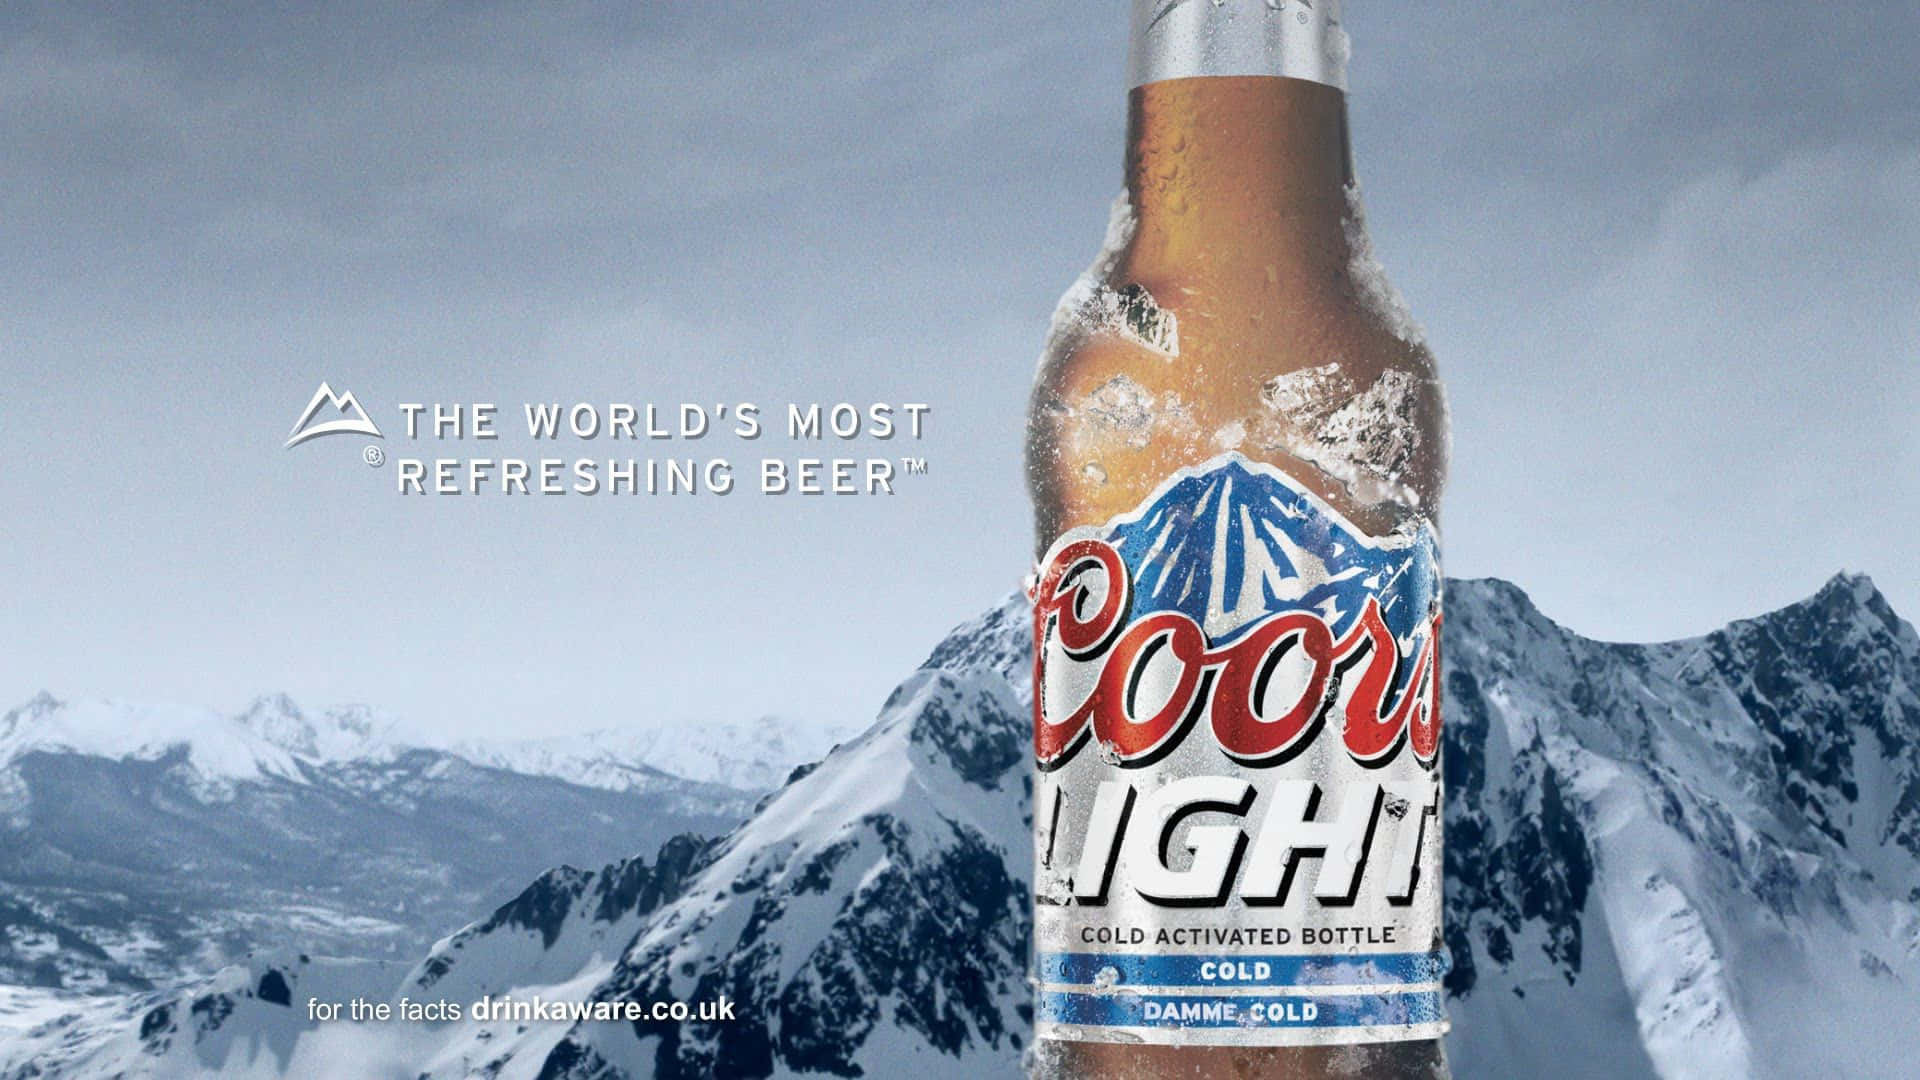 coors light background